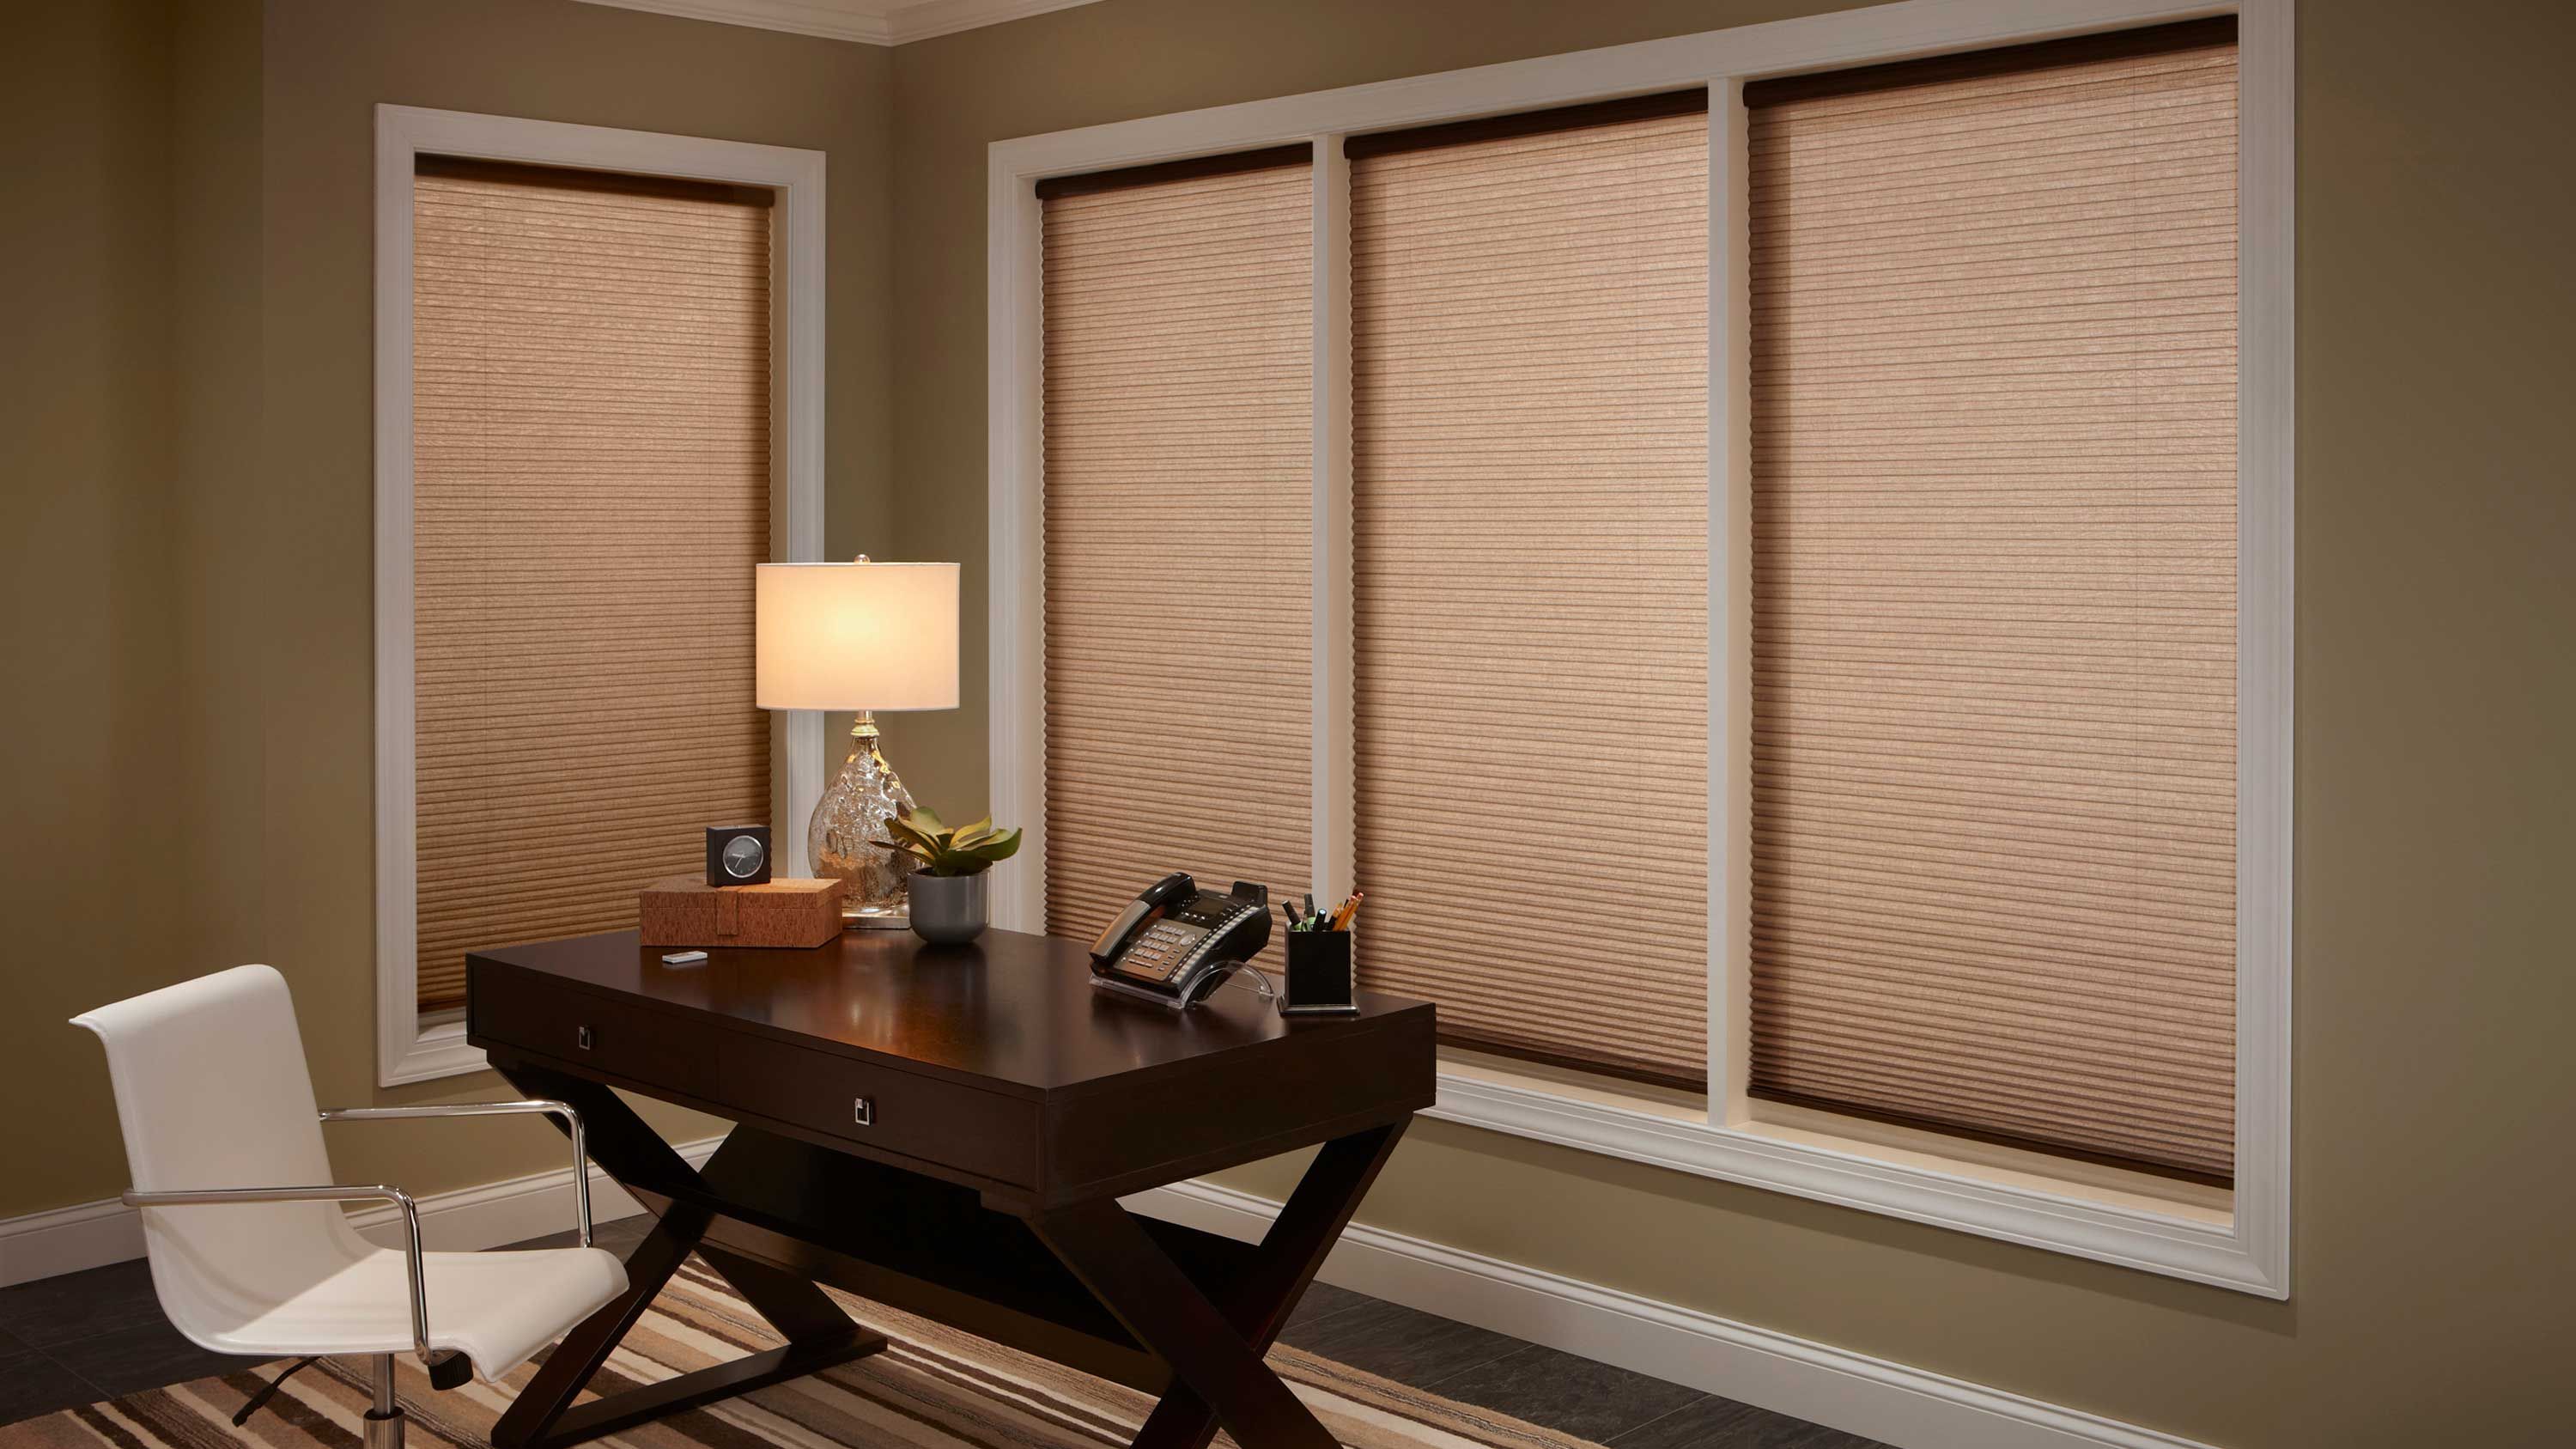 Home Office With Lutron Blinds